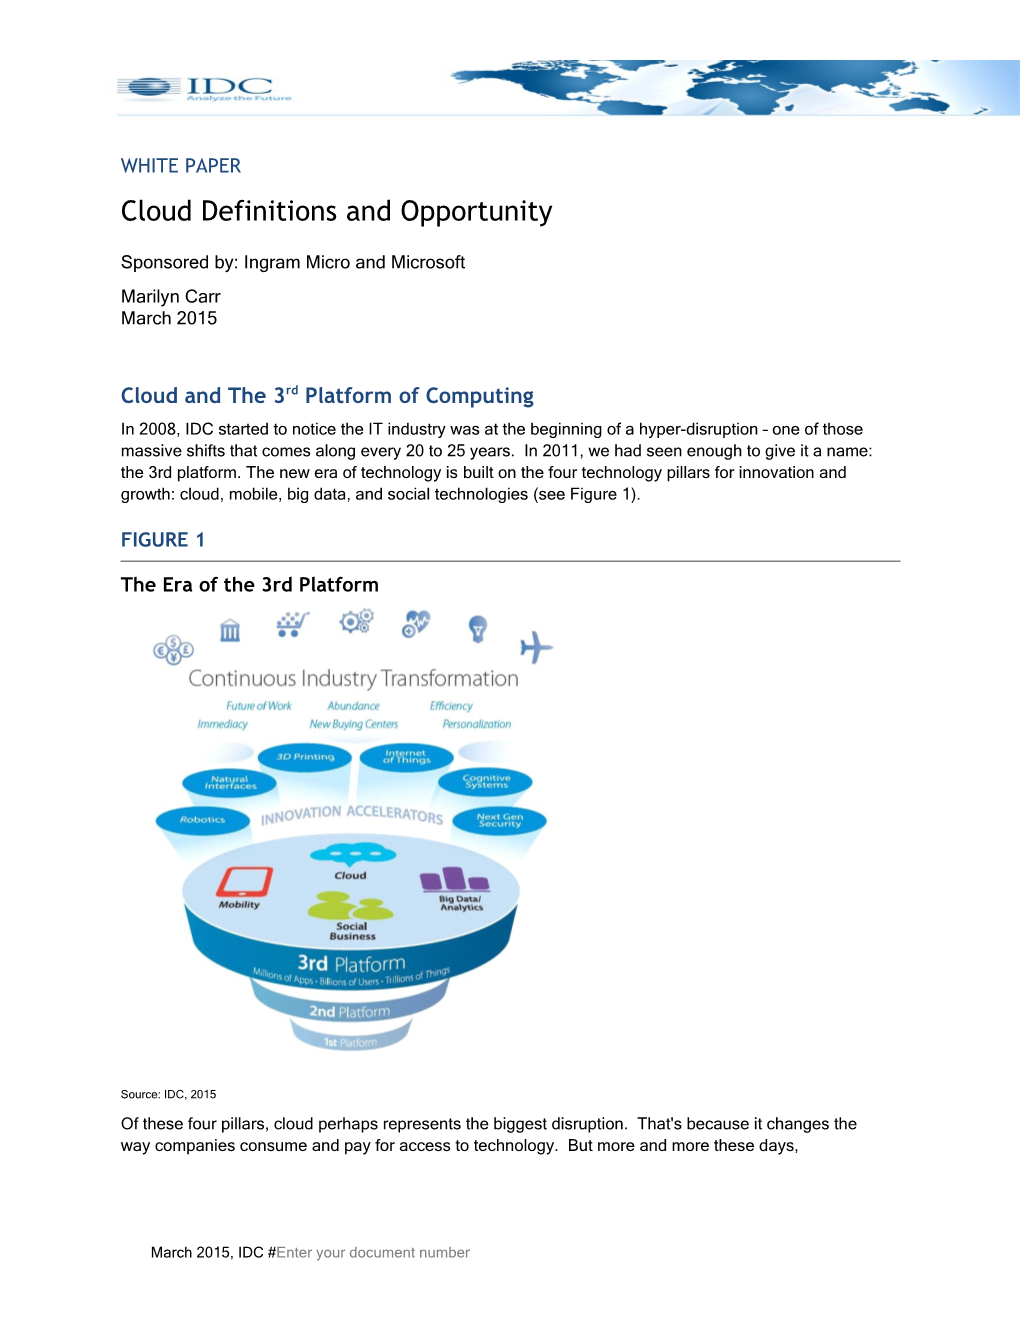 Cloud and the 3Rd Platform of Computing